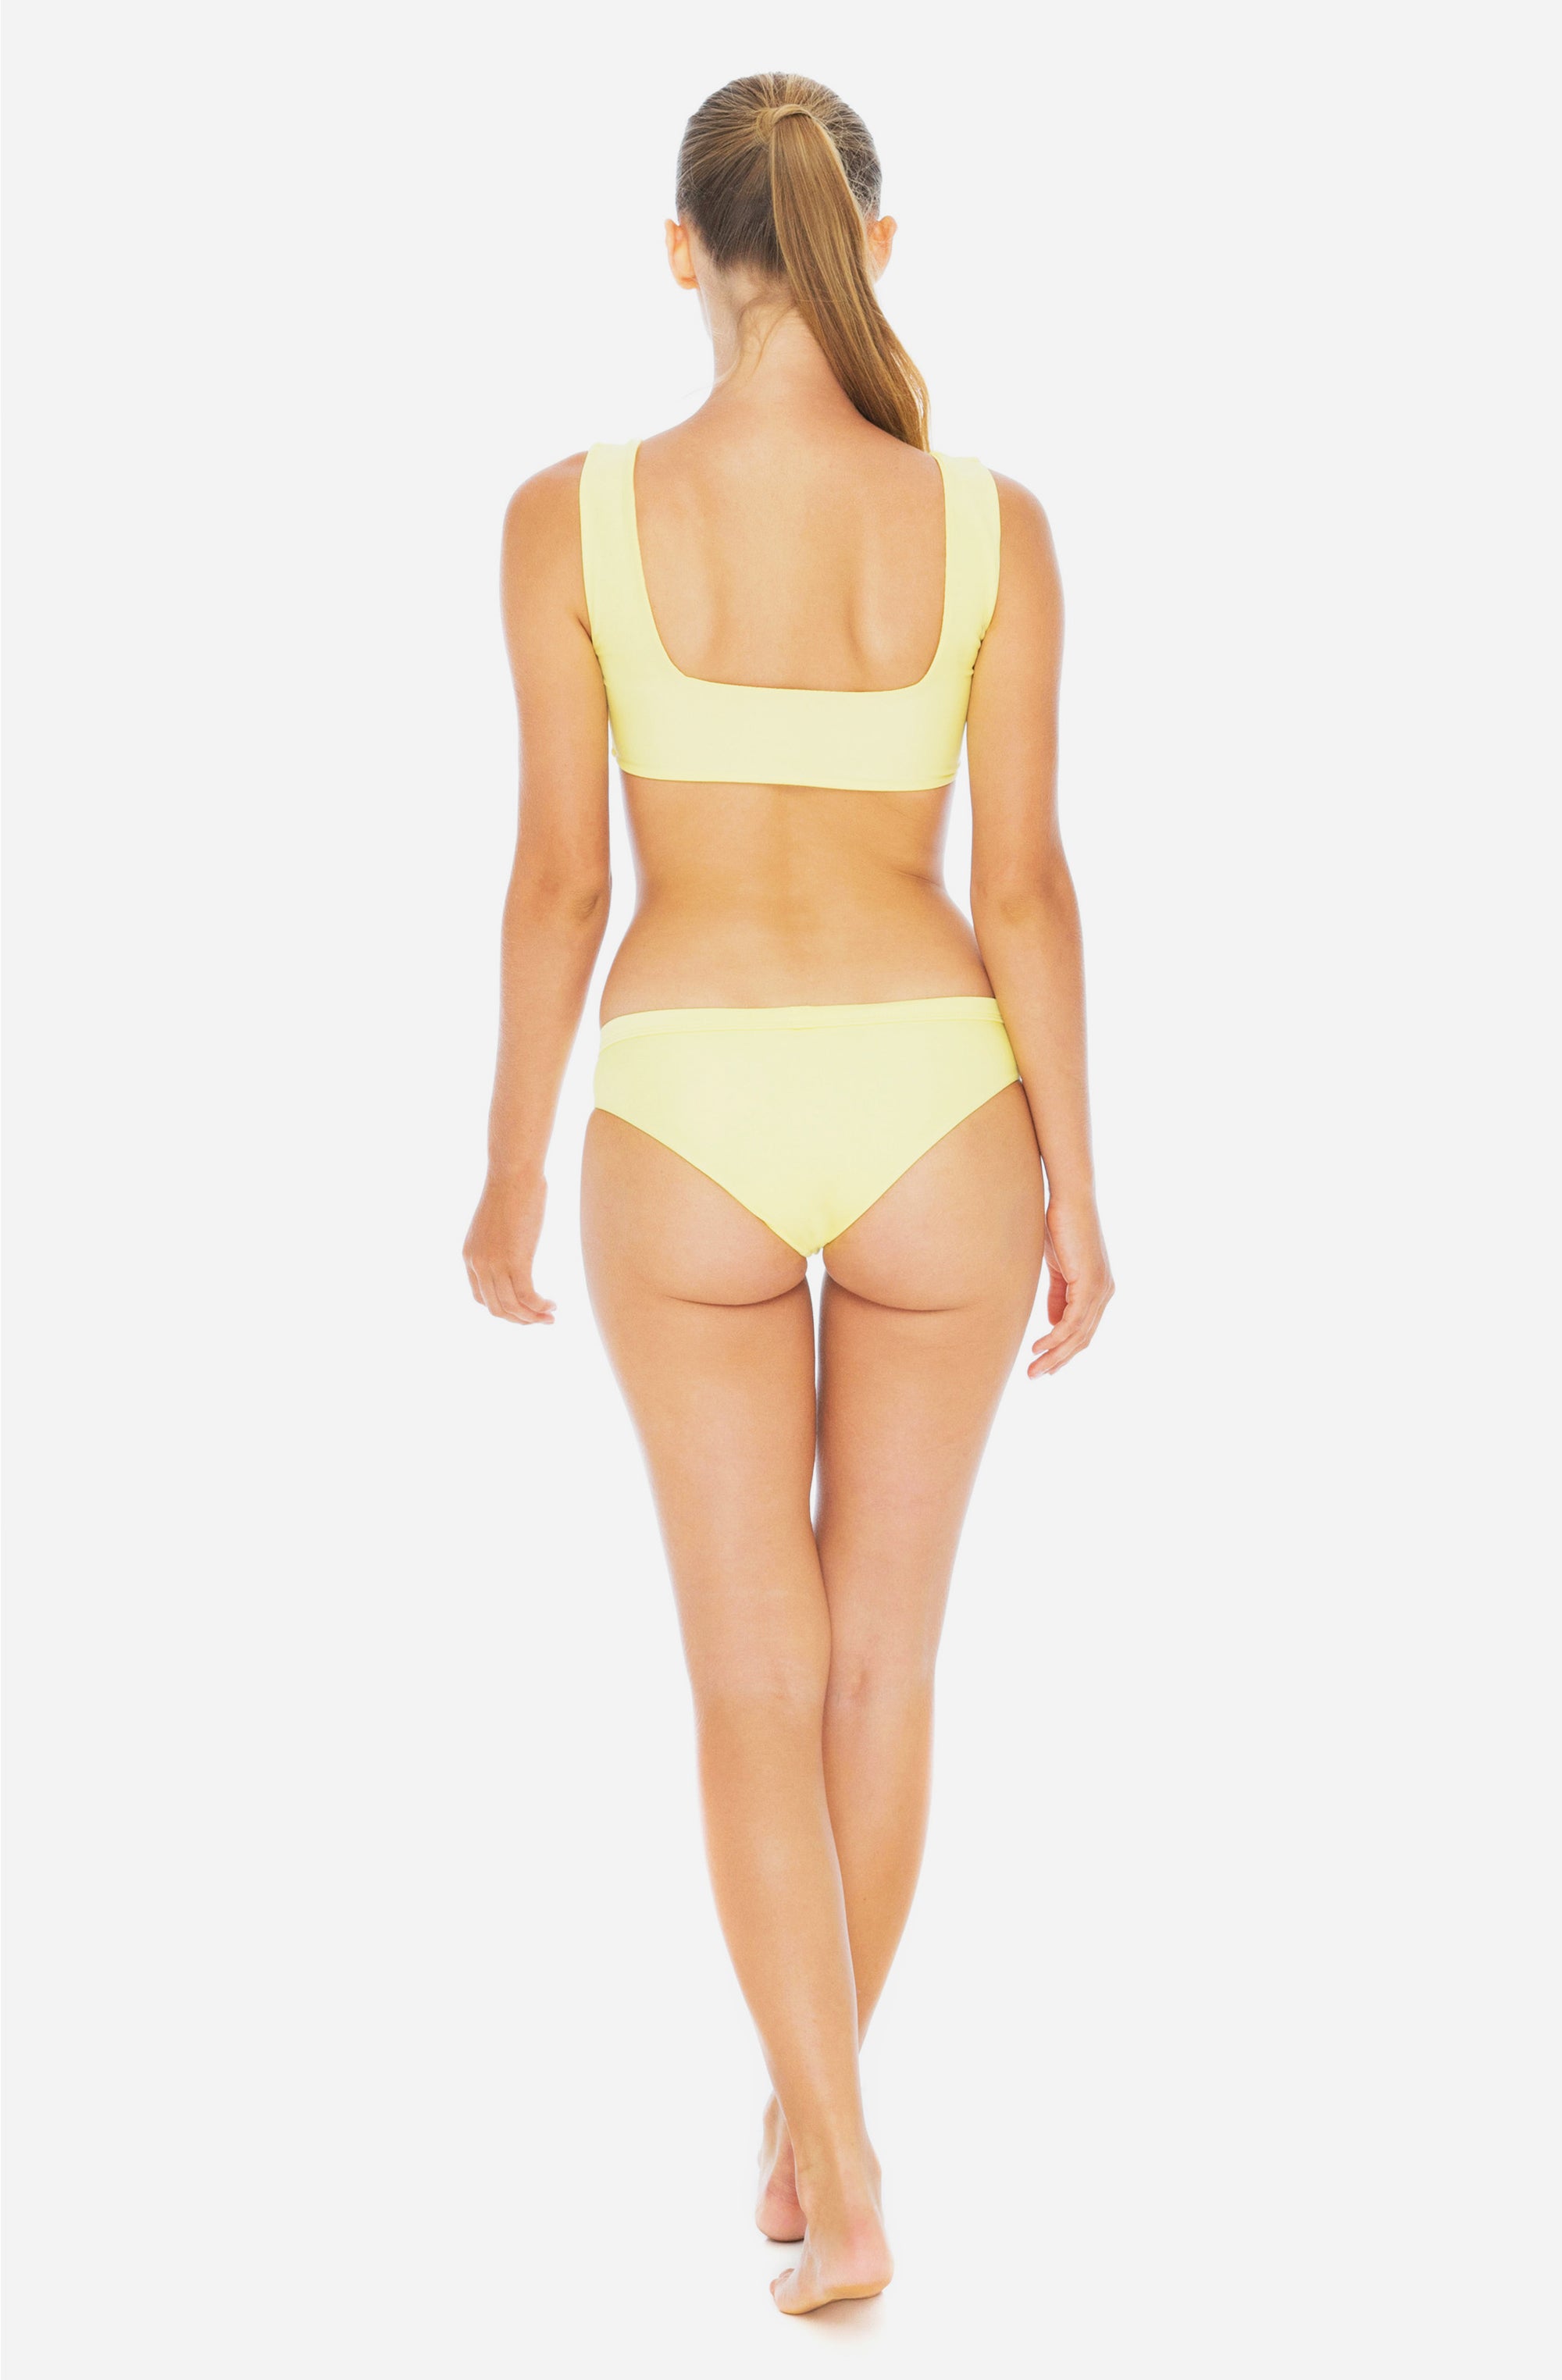 Front view of a woman modelling a surf bikini top and a surf bikini bottom in sunflower yellow.